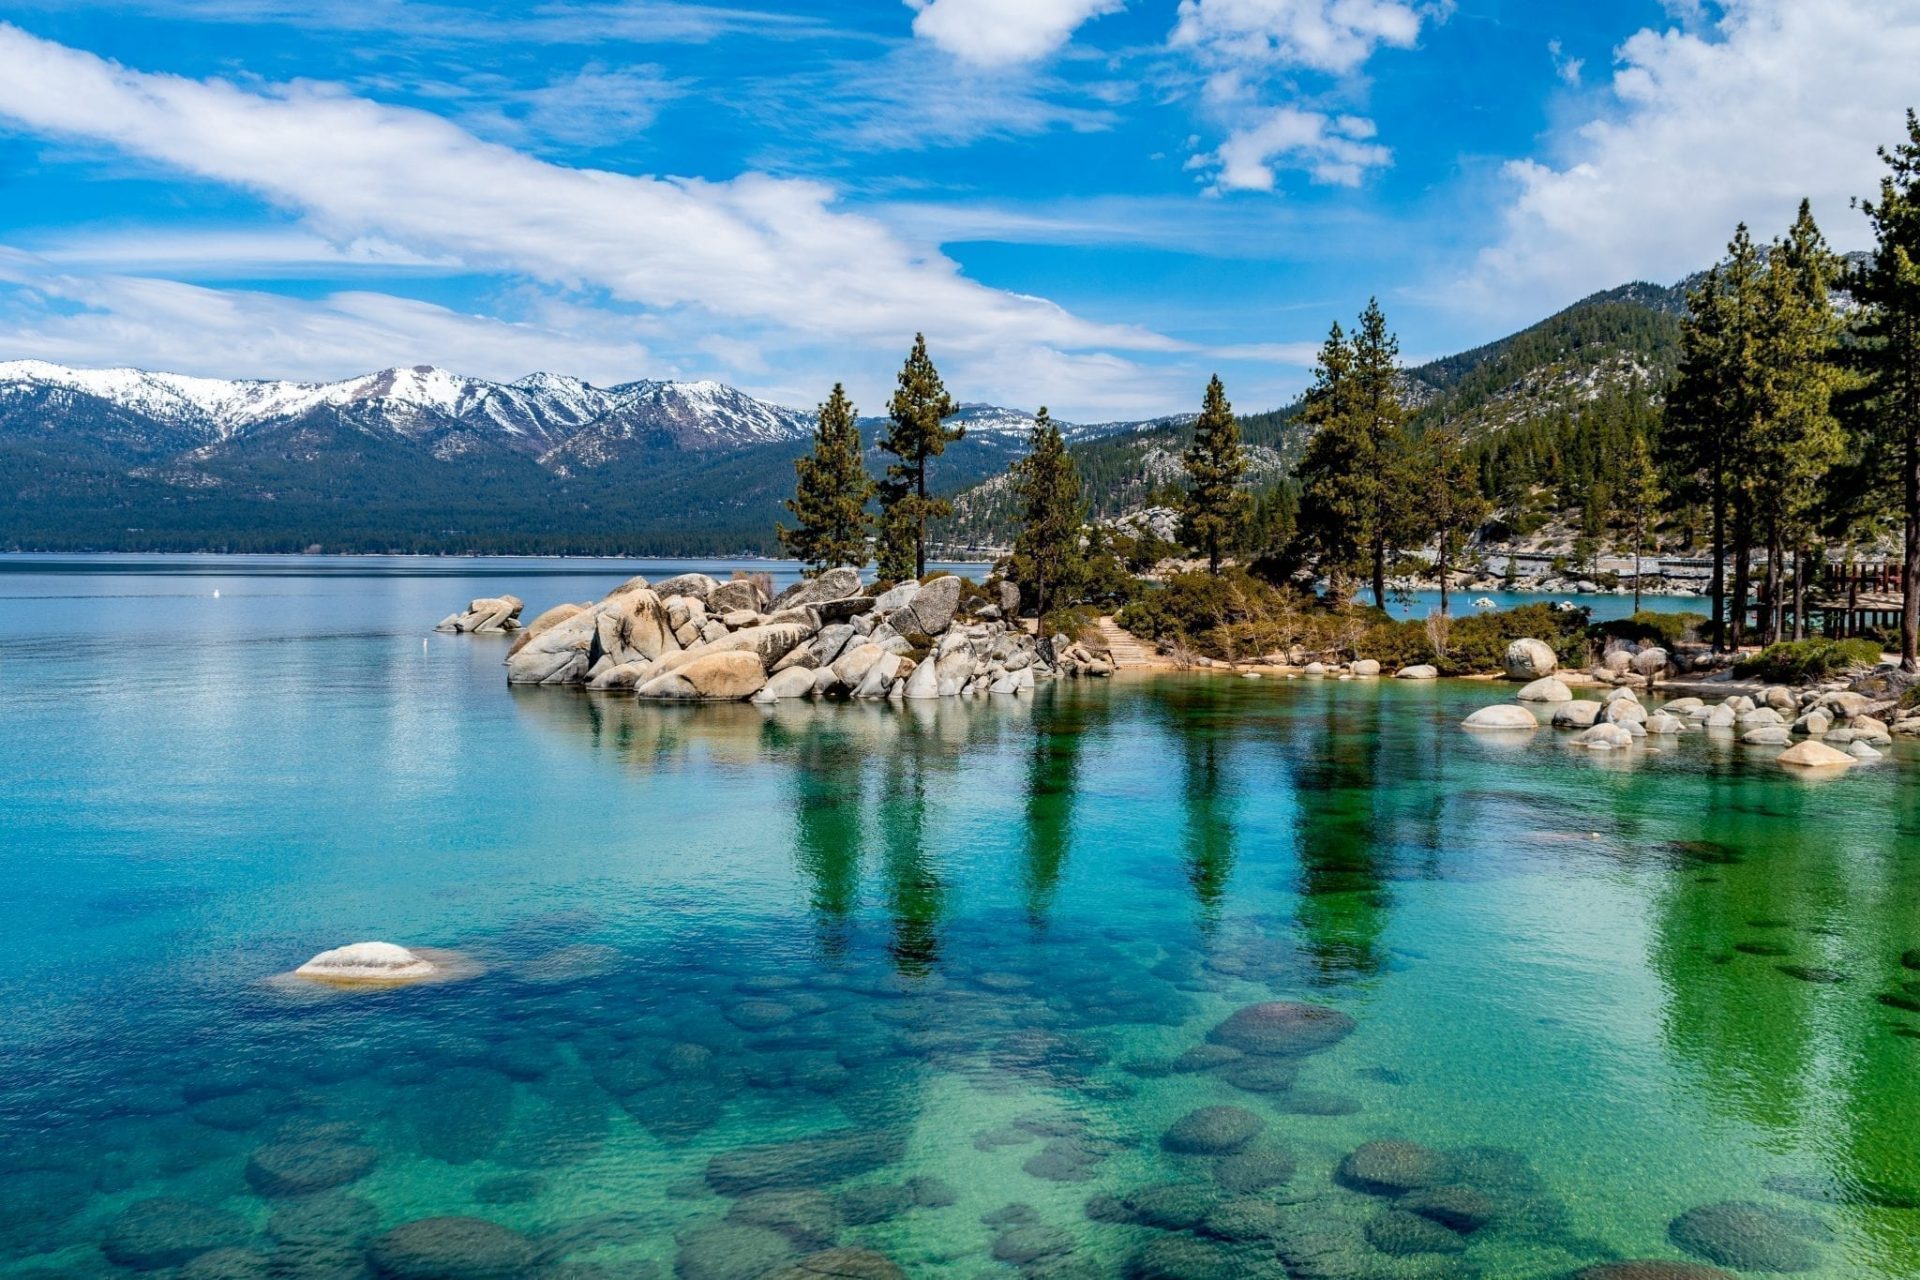 The Complete Guide to the Top 12 Vacation Spots in the US - Tale Of